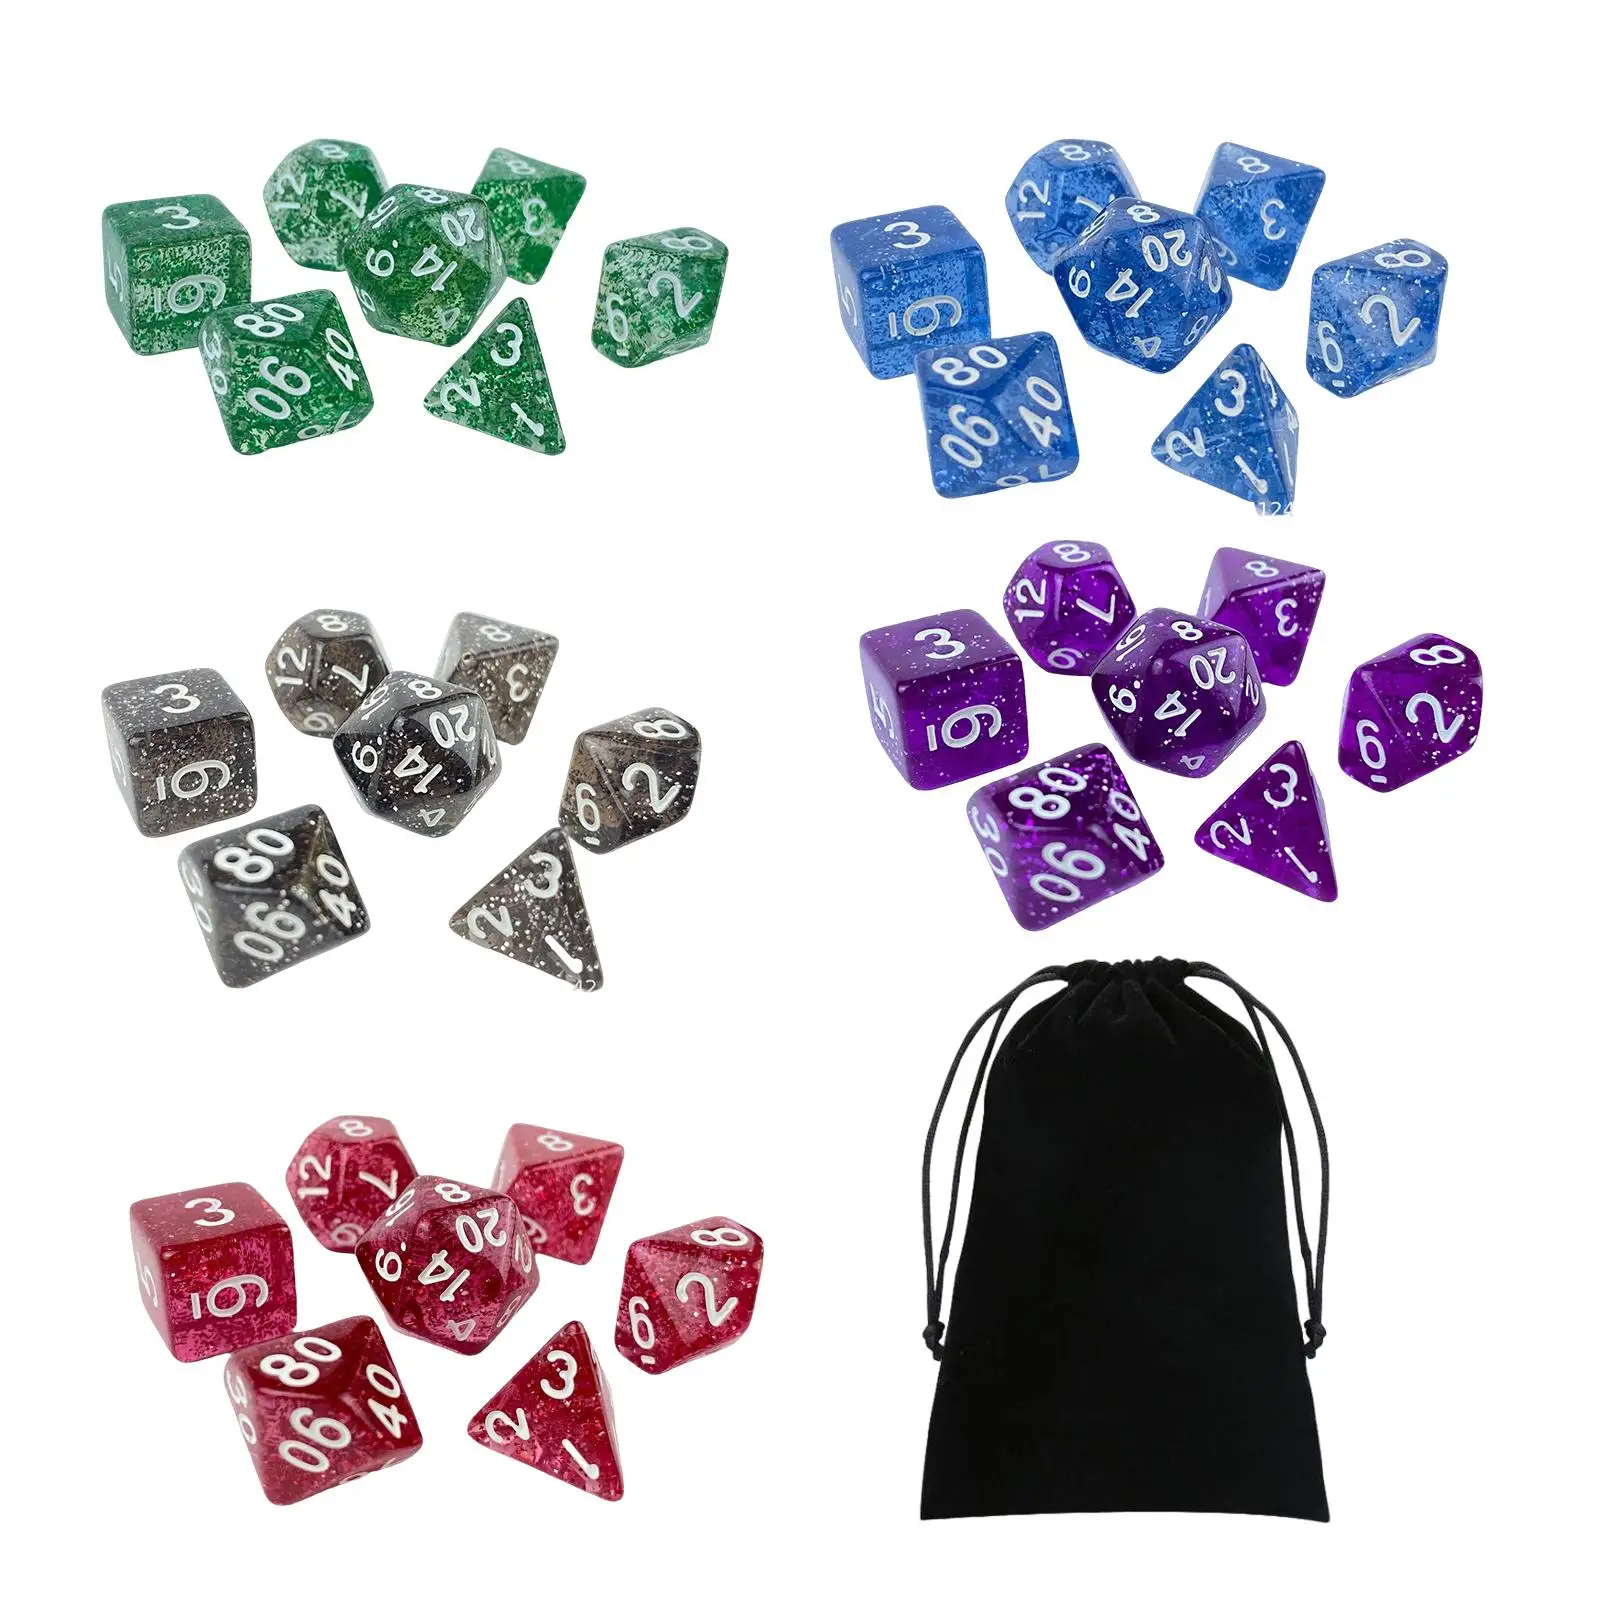 35x Engraved Polyhedral Dices Set Entertainment Toy for KTV Table Games